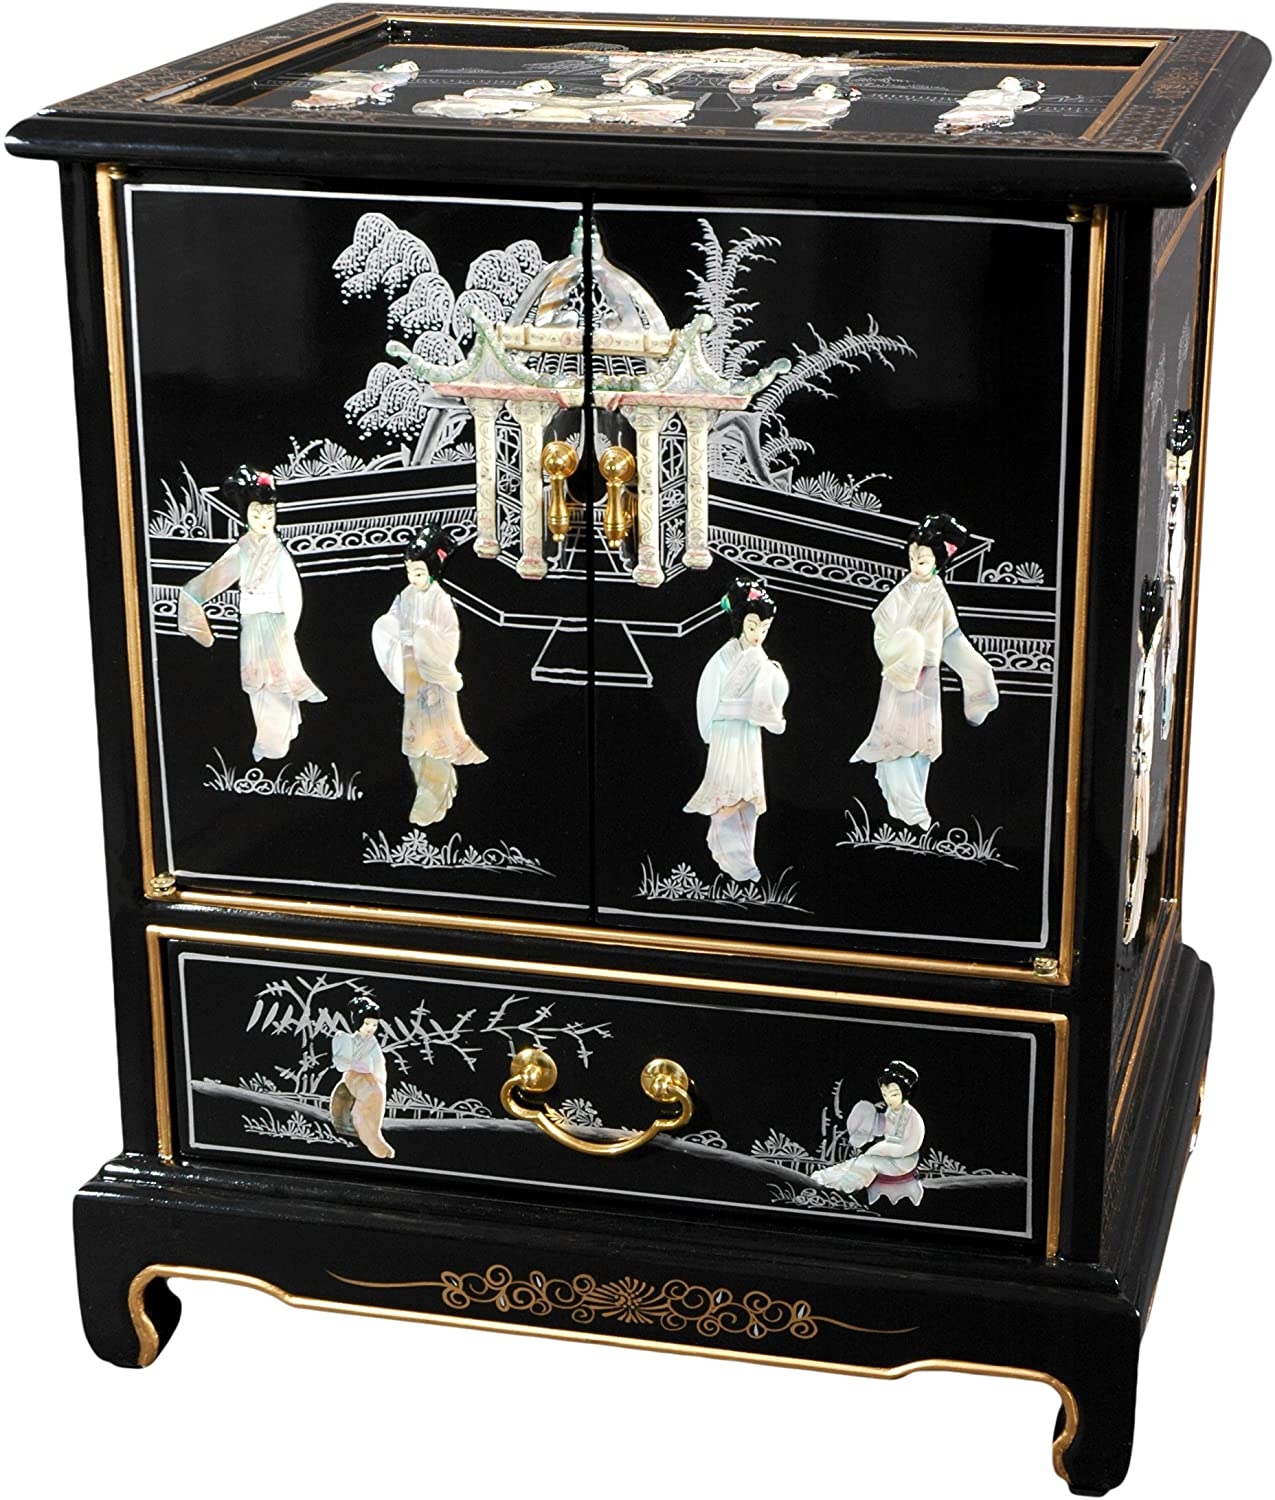 Oriental Furniture Asian Furniture and Decor 24-Inch Japanese Lacquered Oriental End Table/Nightstand, Black Matte